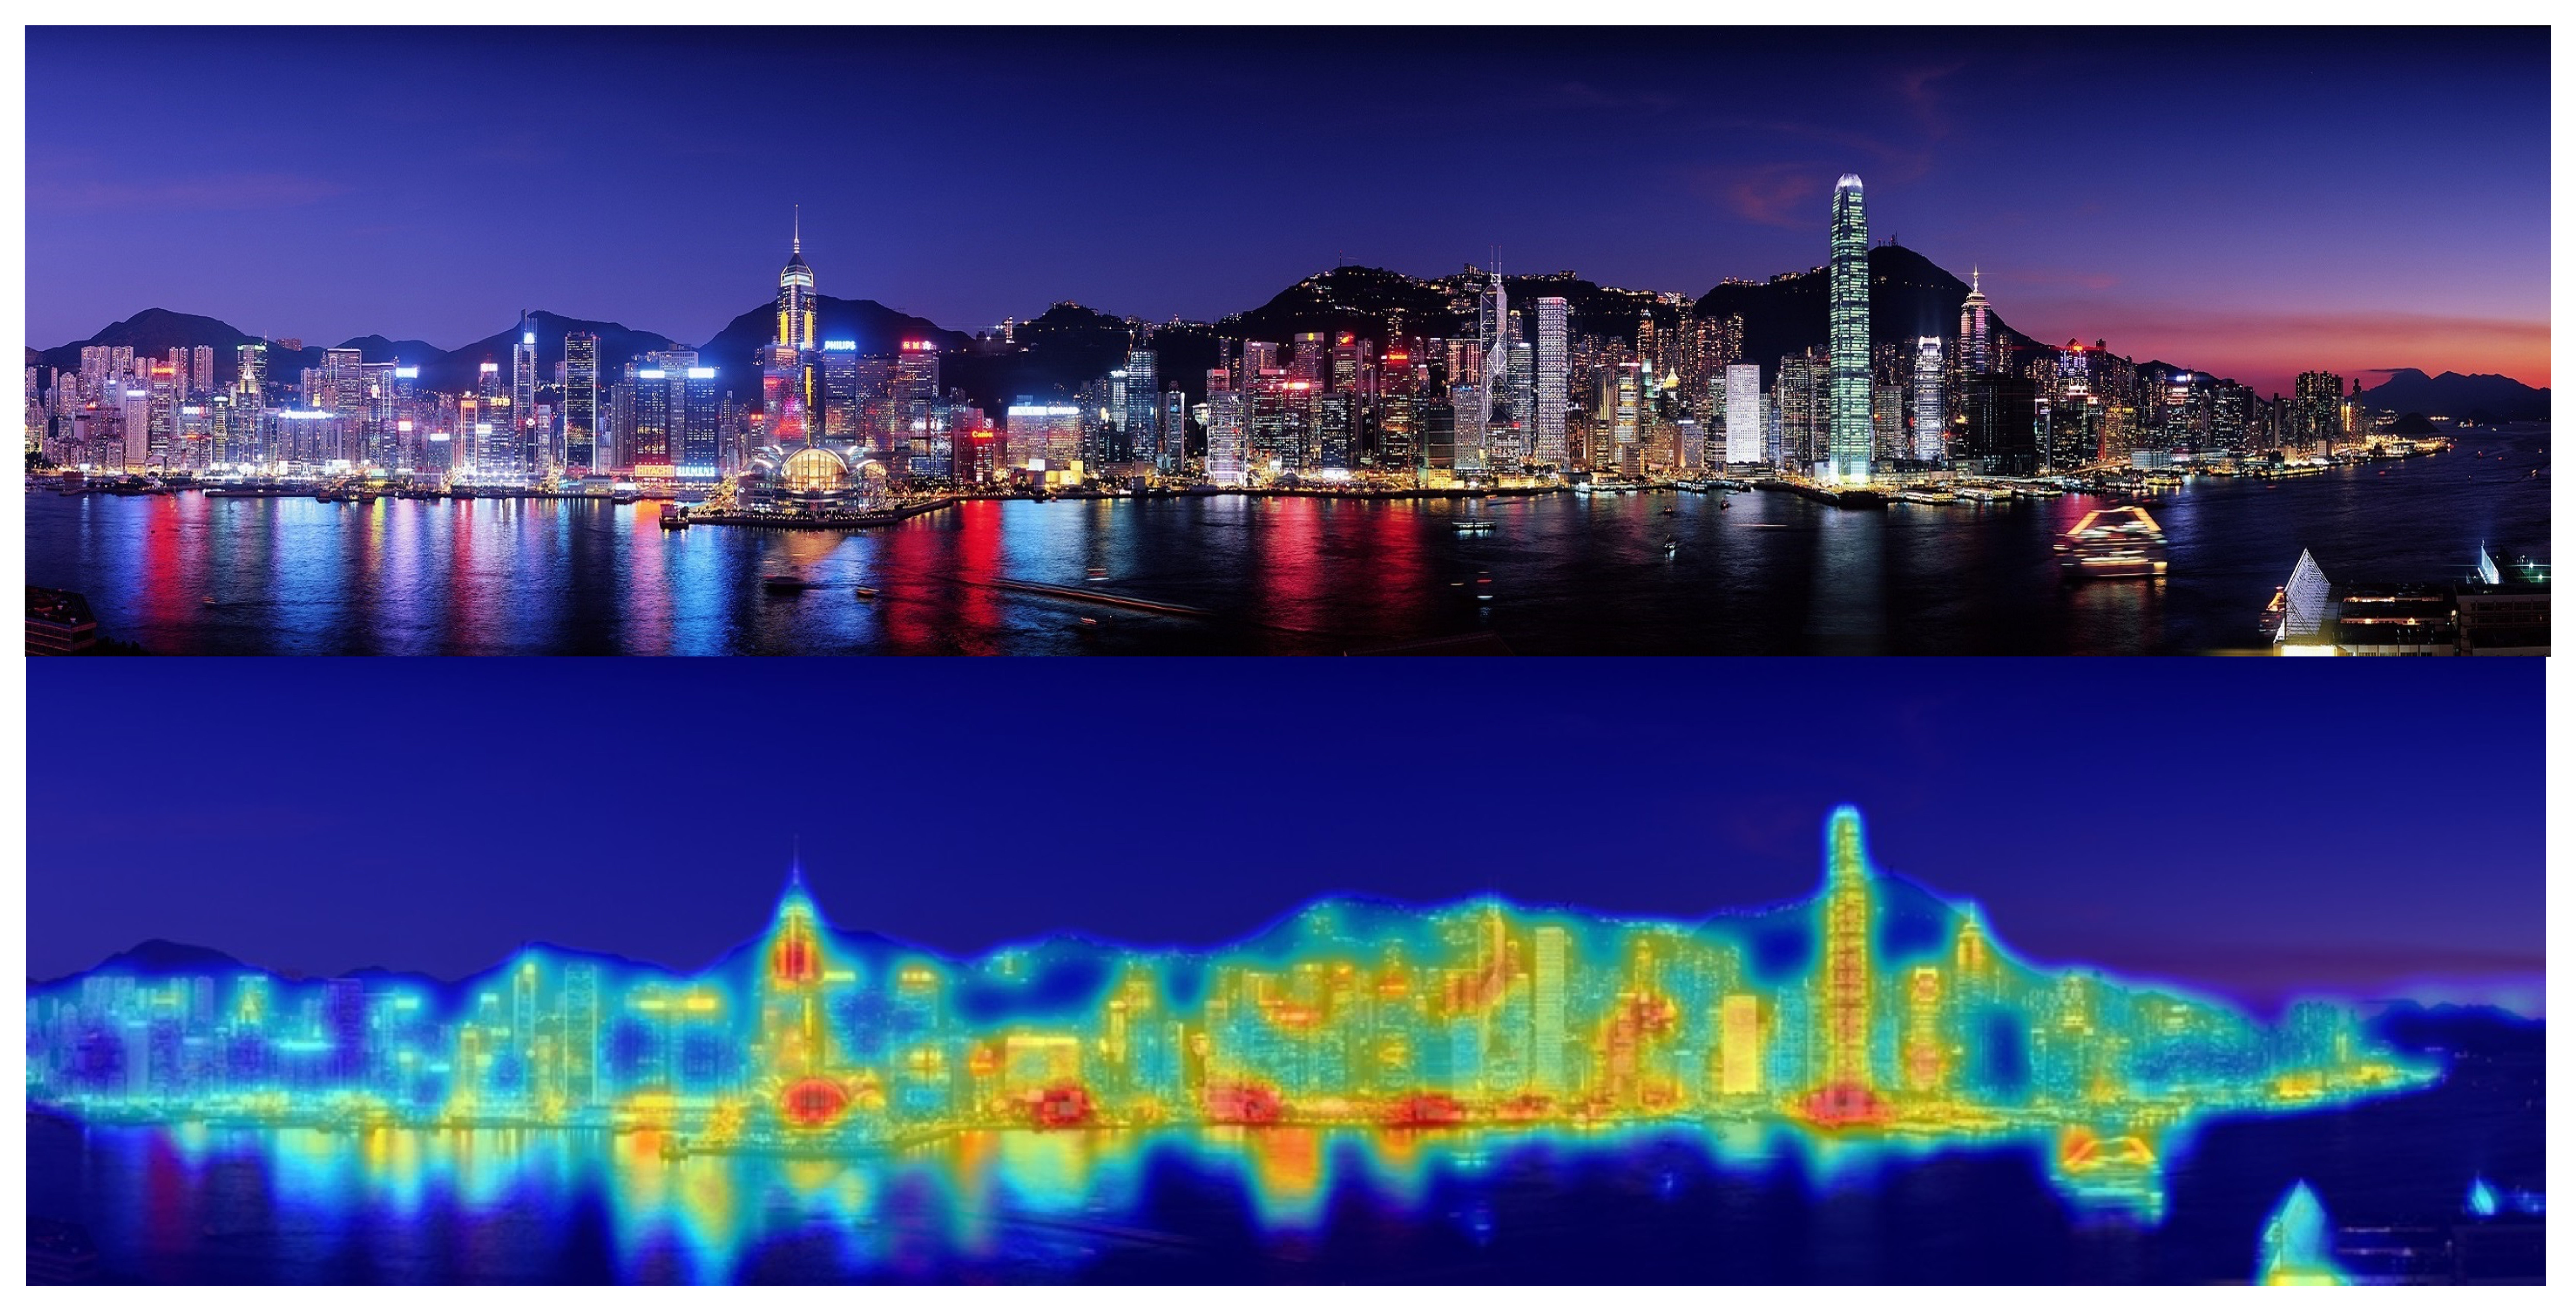 Hong Kong and its saliency map: Image by skeeze from Pixabay, Saliency map by DragonflyAI